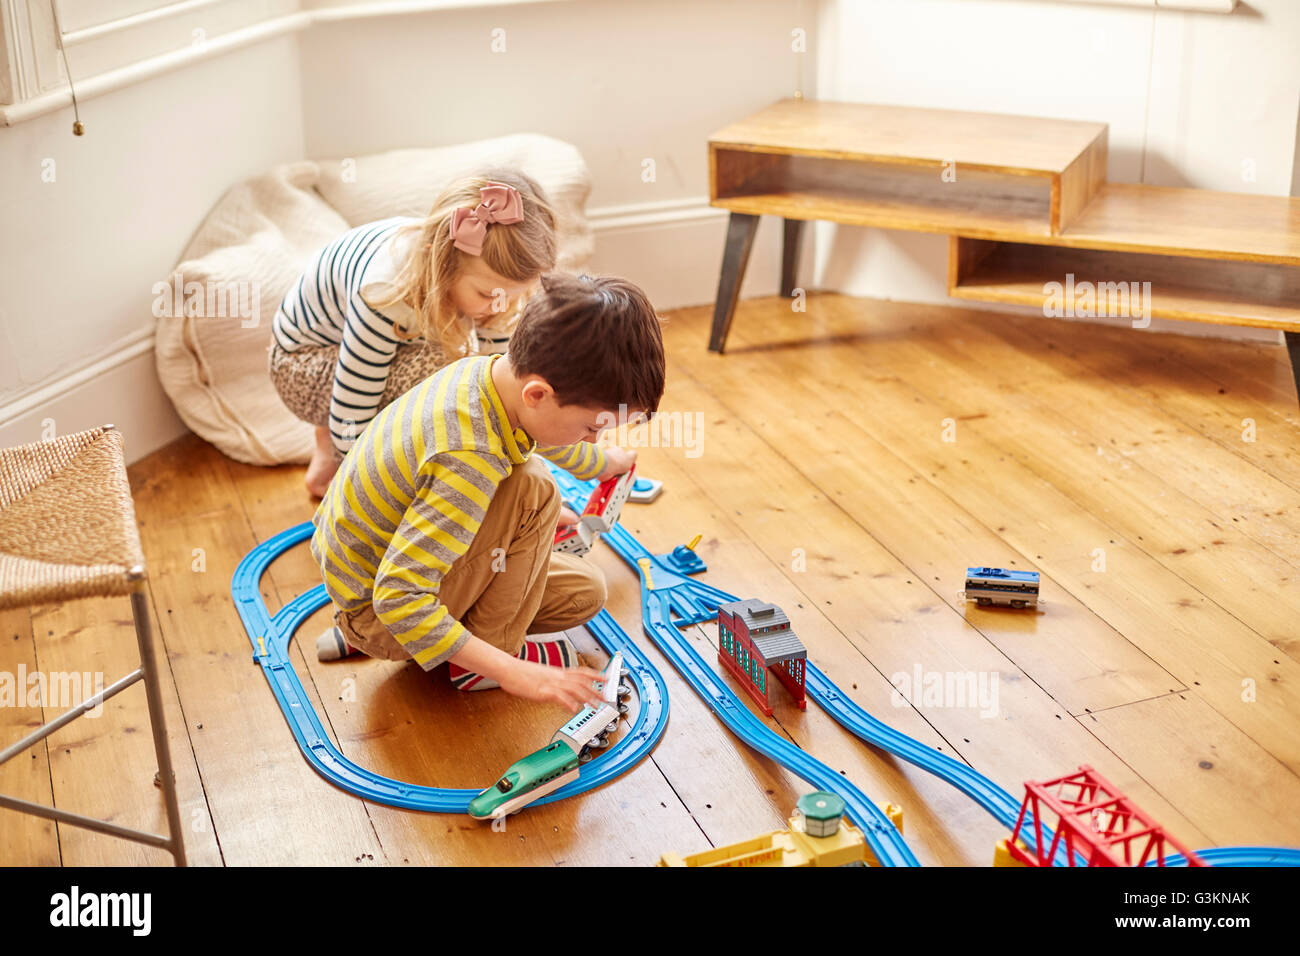 Young girl and boy playing with toy train set Stock Photo